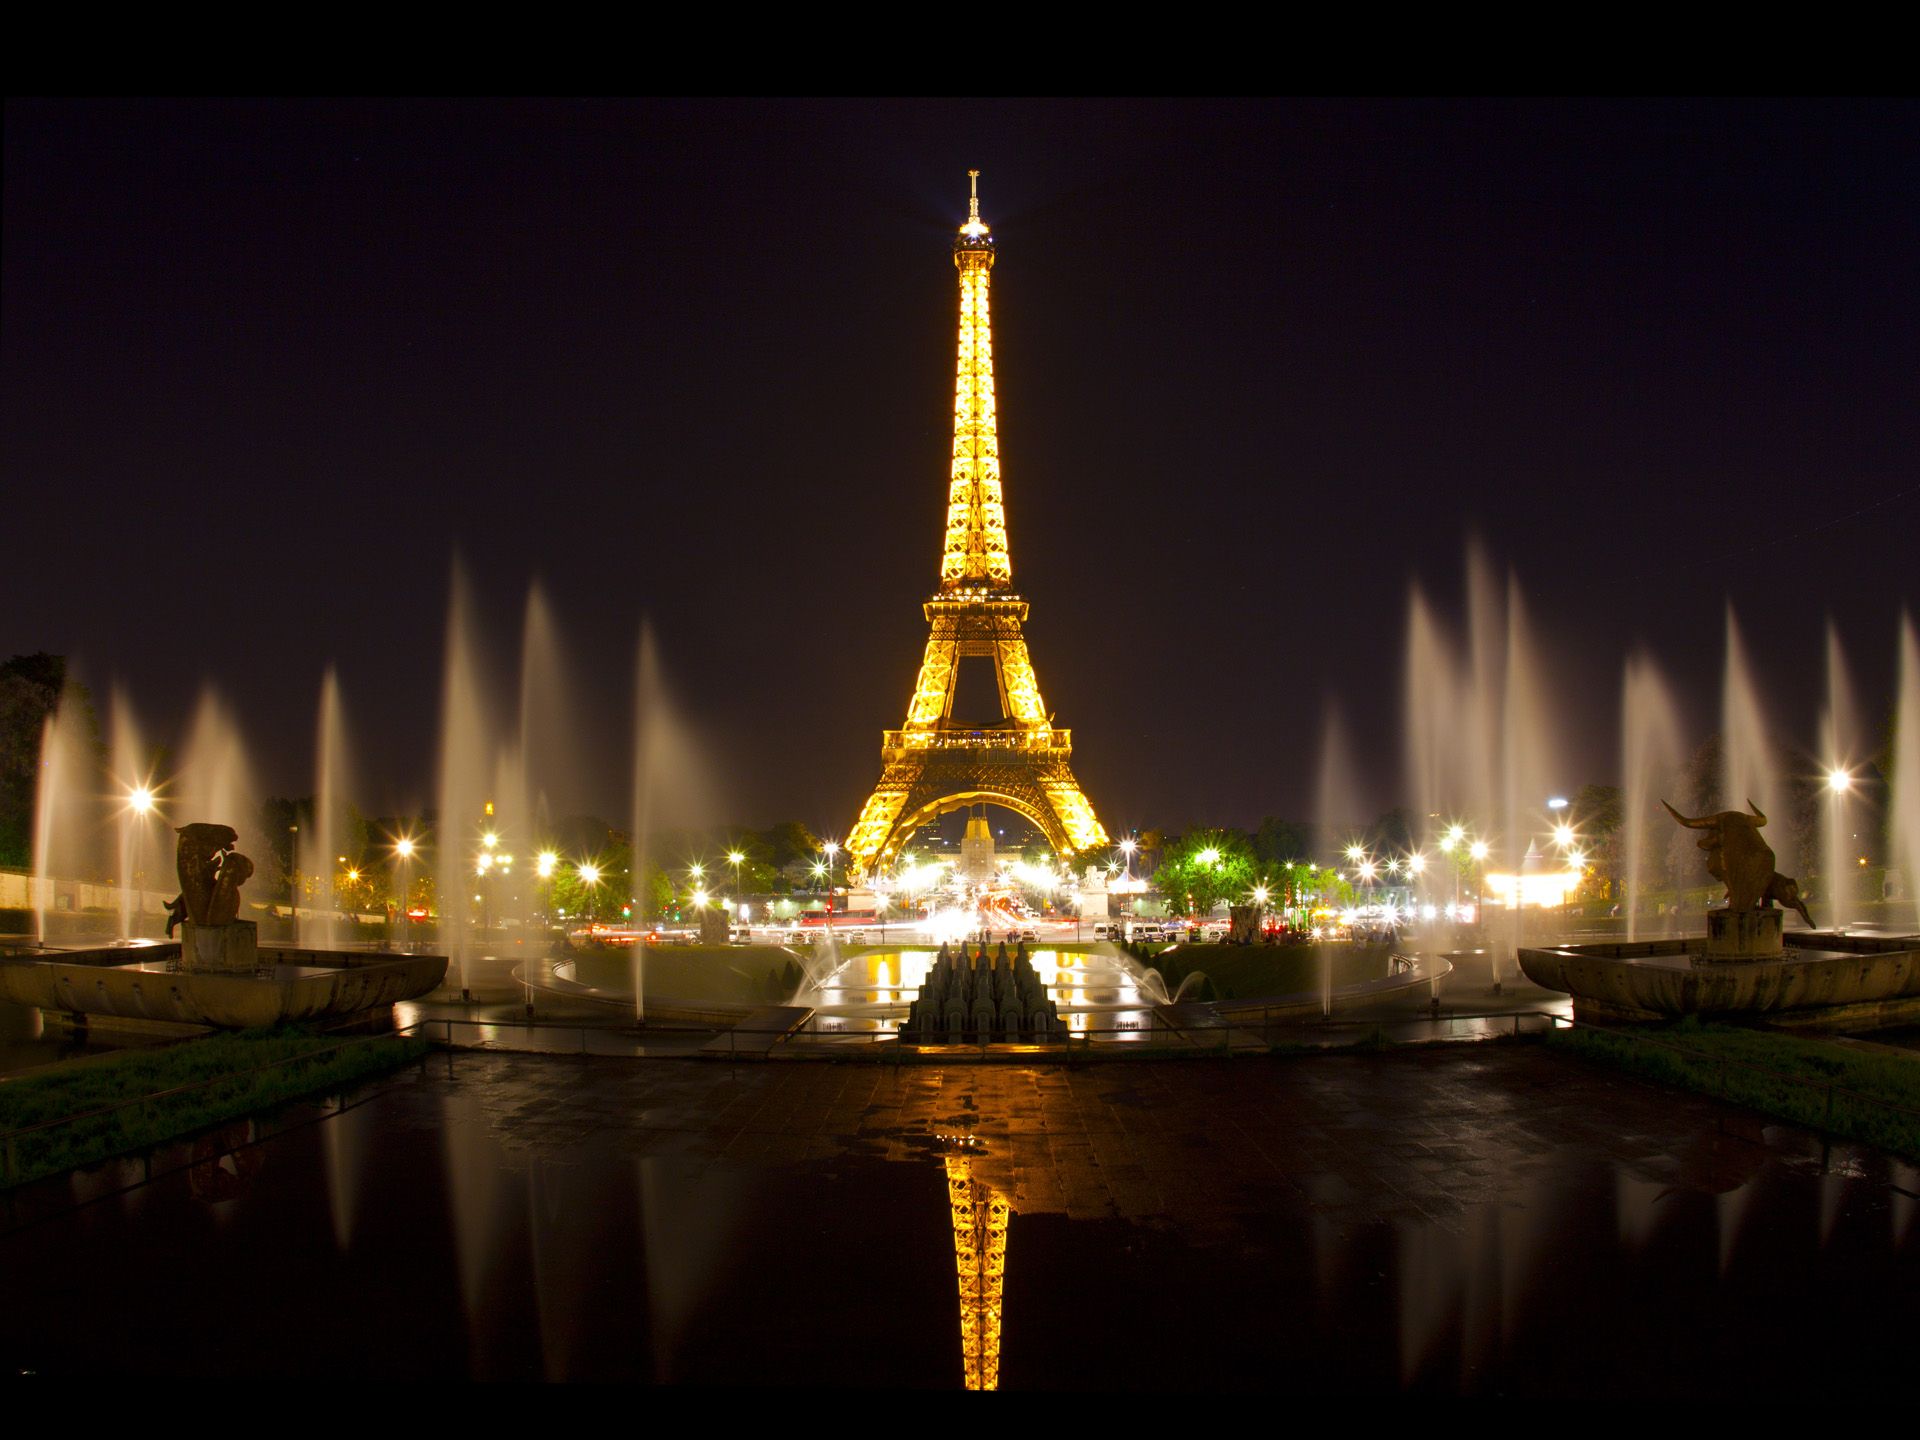 Eiffel Tower with fountains at night